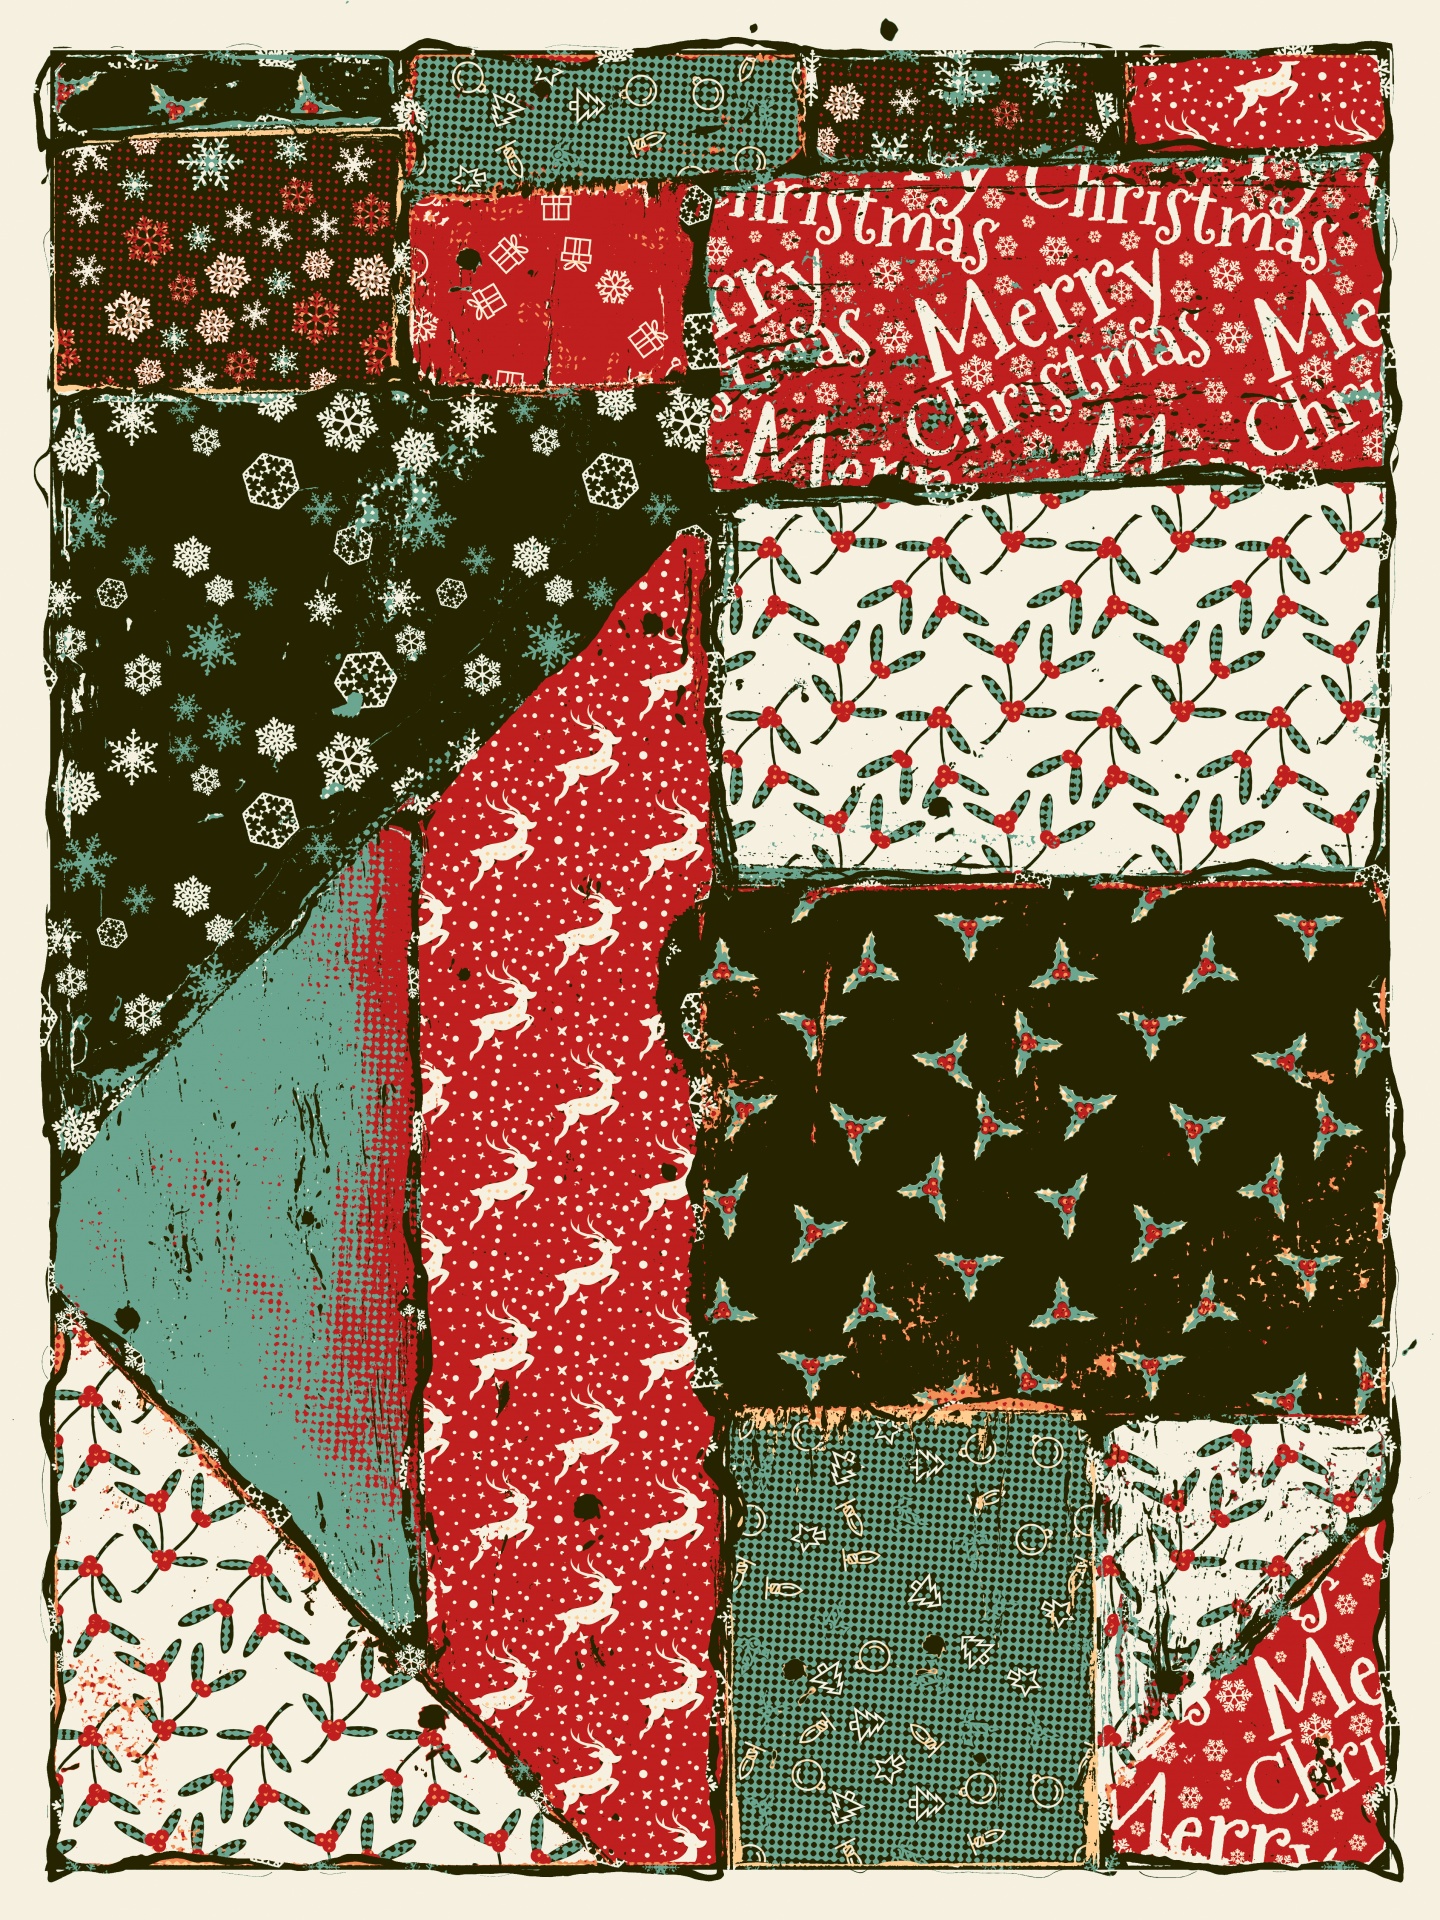 Abstract Grunge Christmas Collage